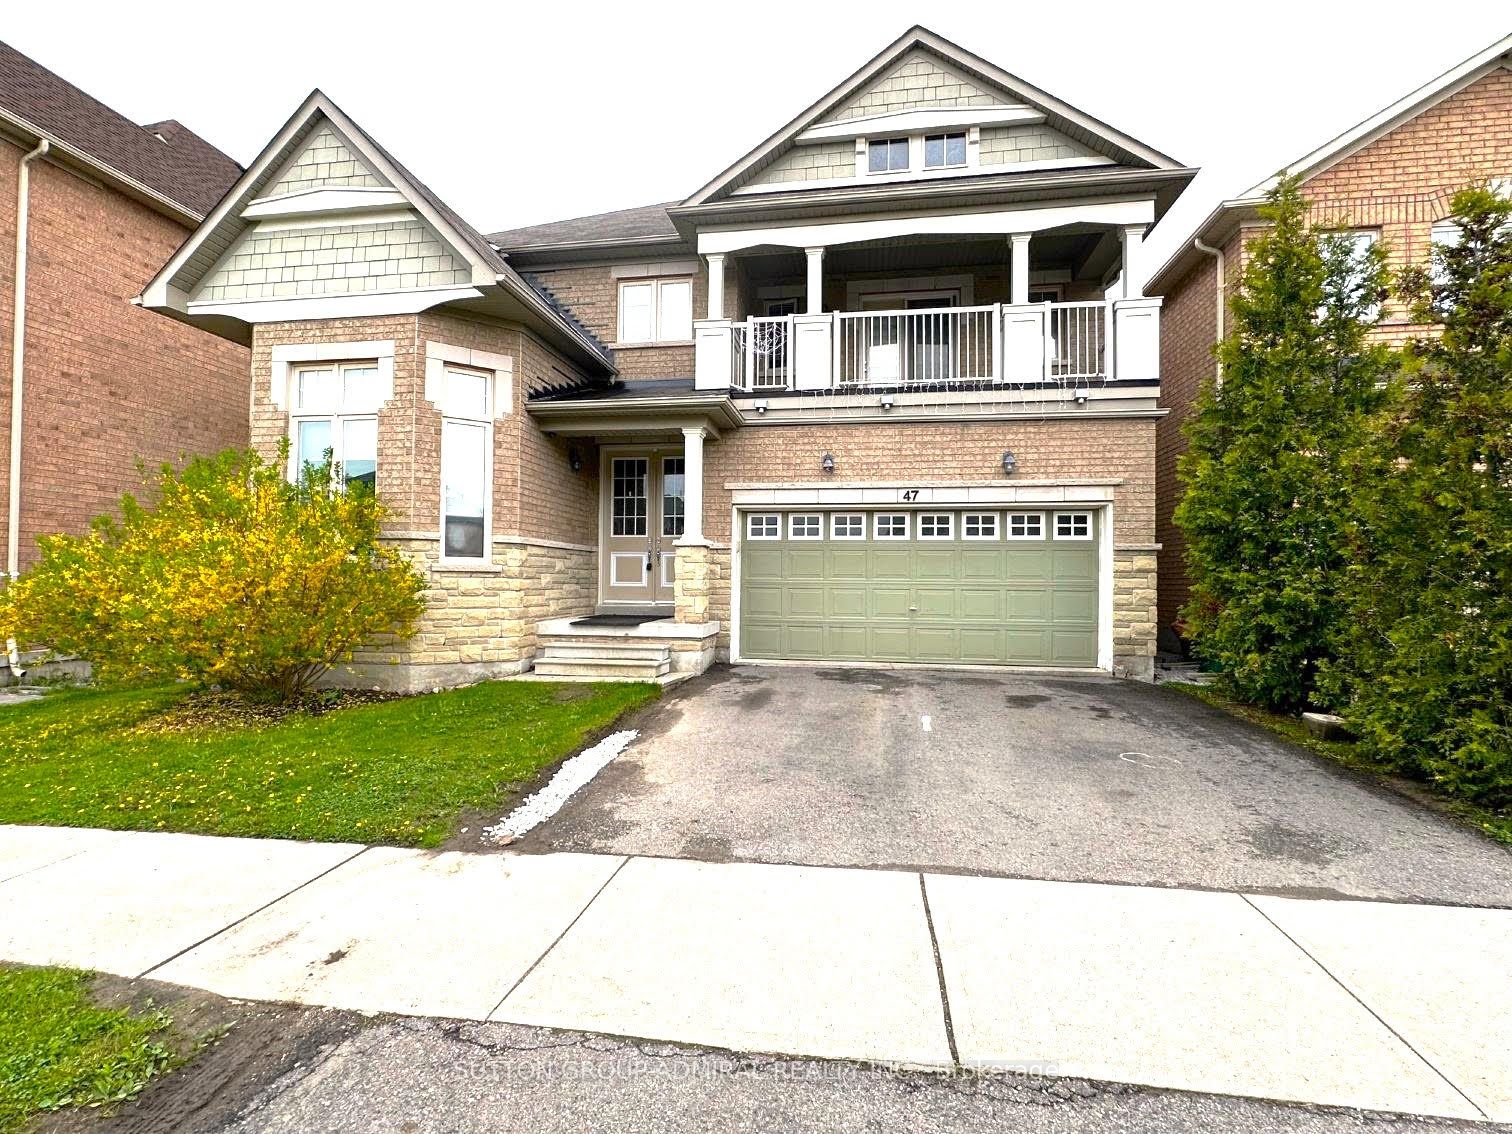 Detached house for sale at 47 Township Ave Richmond Hill Ontario